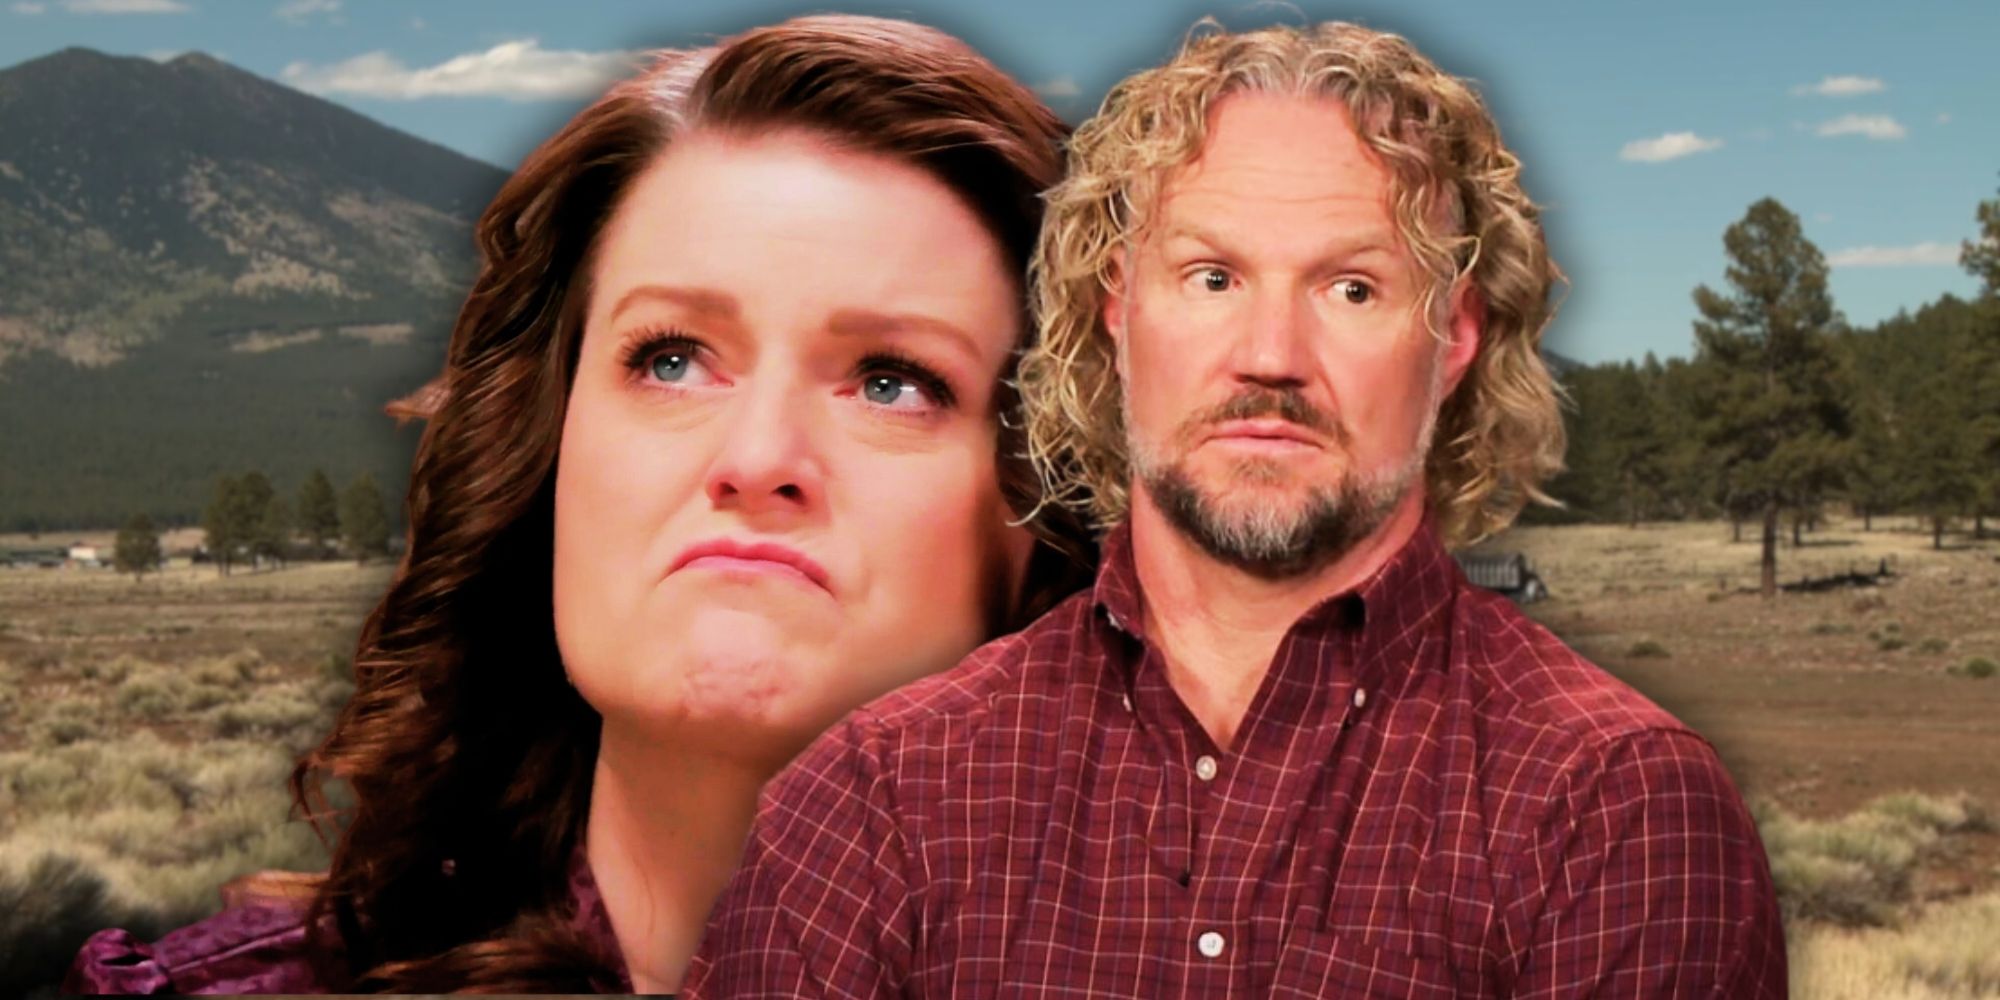 Sister Wives - Coyote Pass Drama Ruined The Brown Family ("Monogamous" Kody  & Robyn Could Split Up)